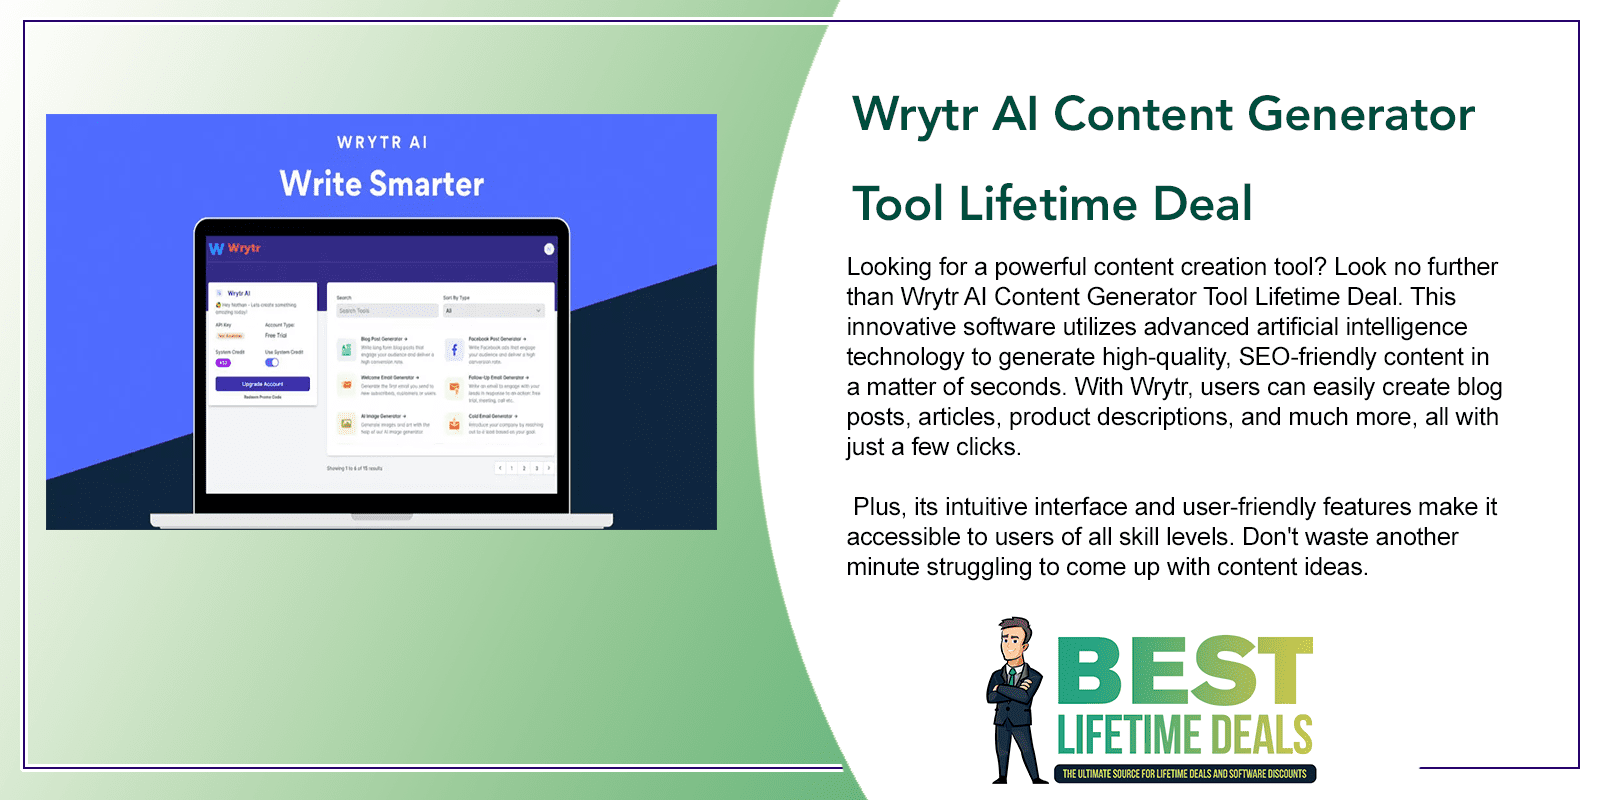 Wrytr AI Content Generator Tool Featured Image